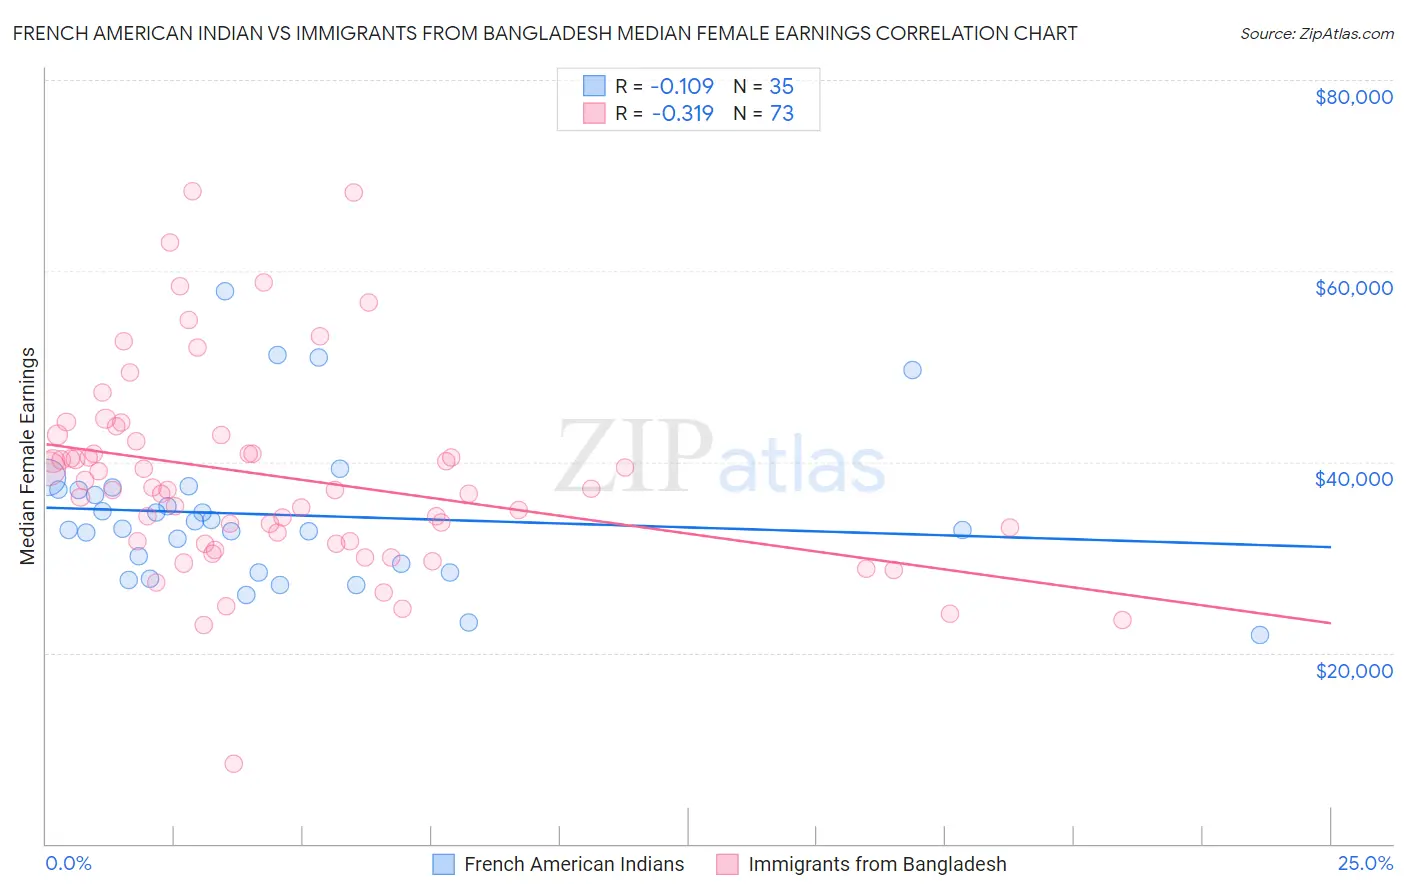 French American Indian vs Immigrants from Bangladesh Median Female Earnings